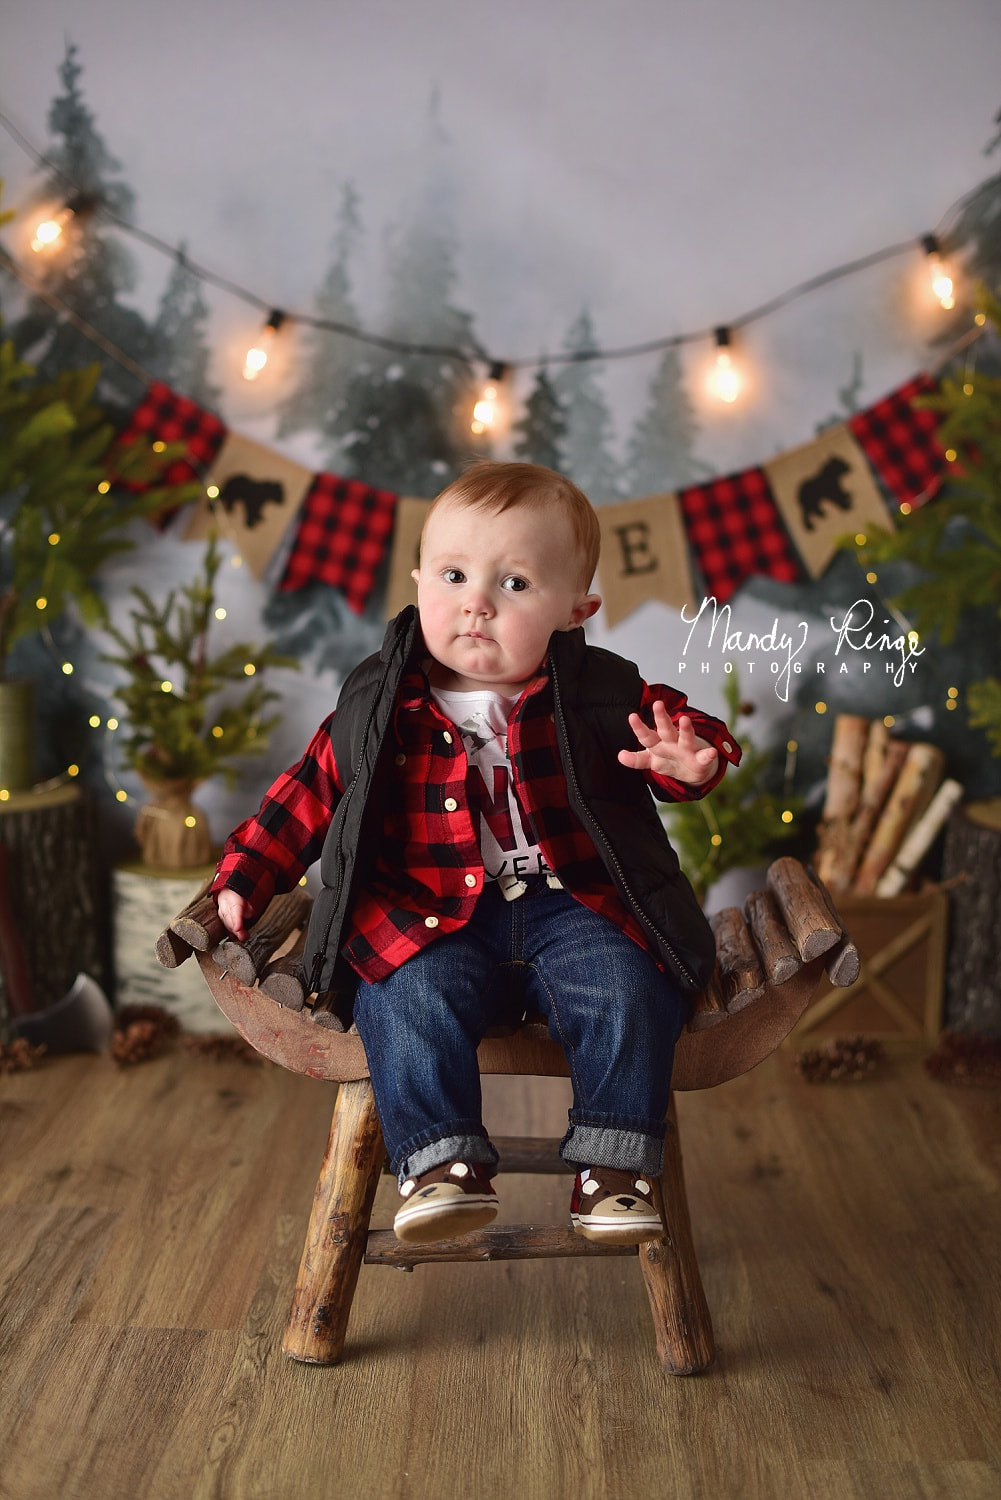 First birthday milestone portraits // Lumberjack theme, Vale backdrop from Intuition Backgrounds // Mandy Ringe Photography // Sycamore, IL Photographer